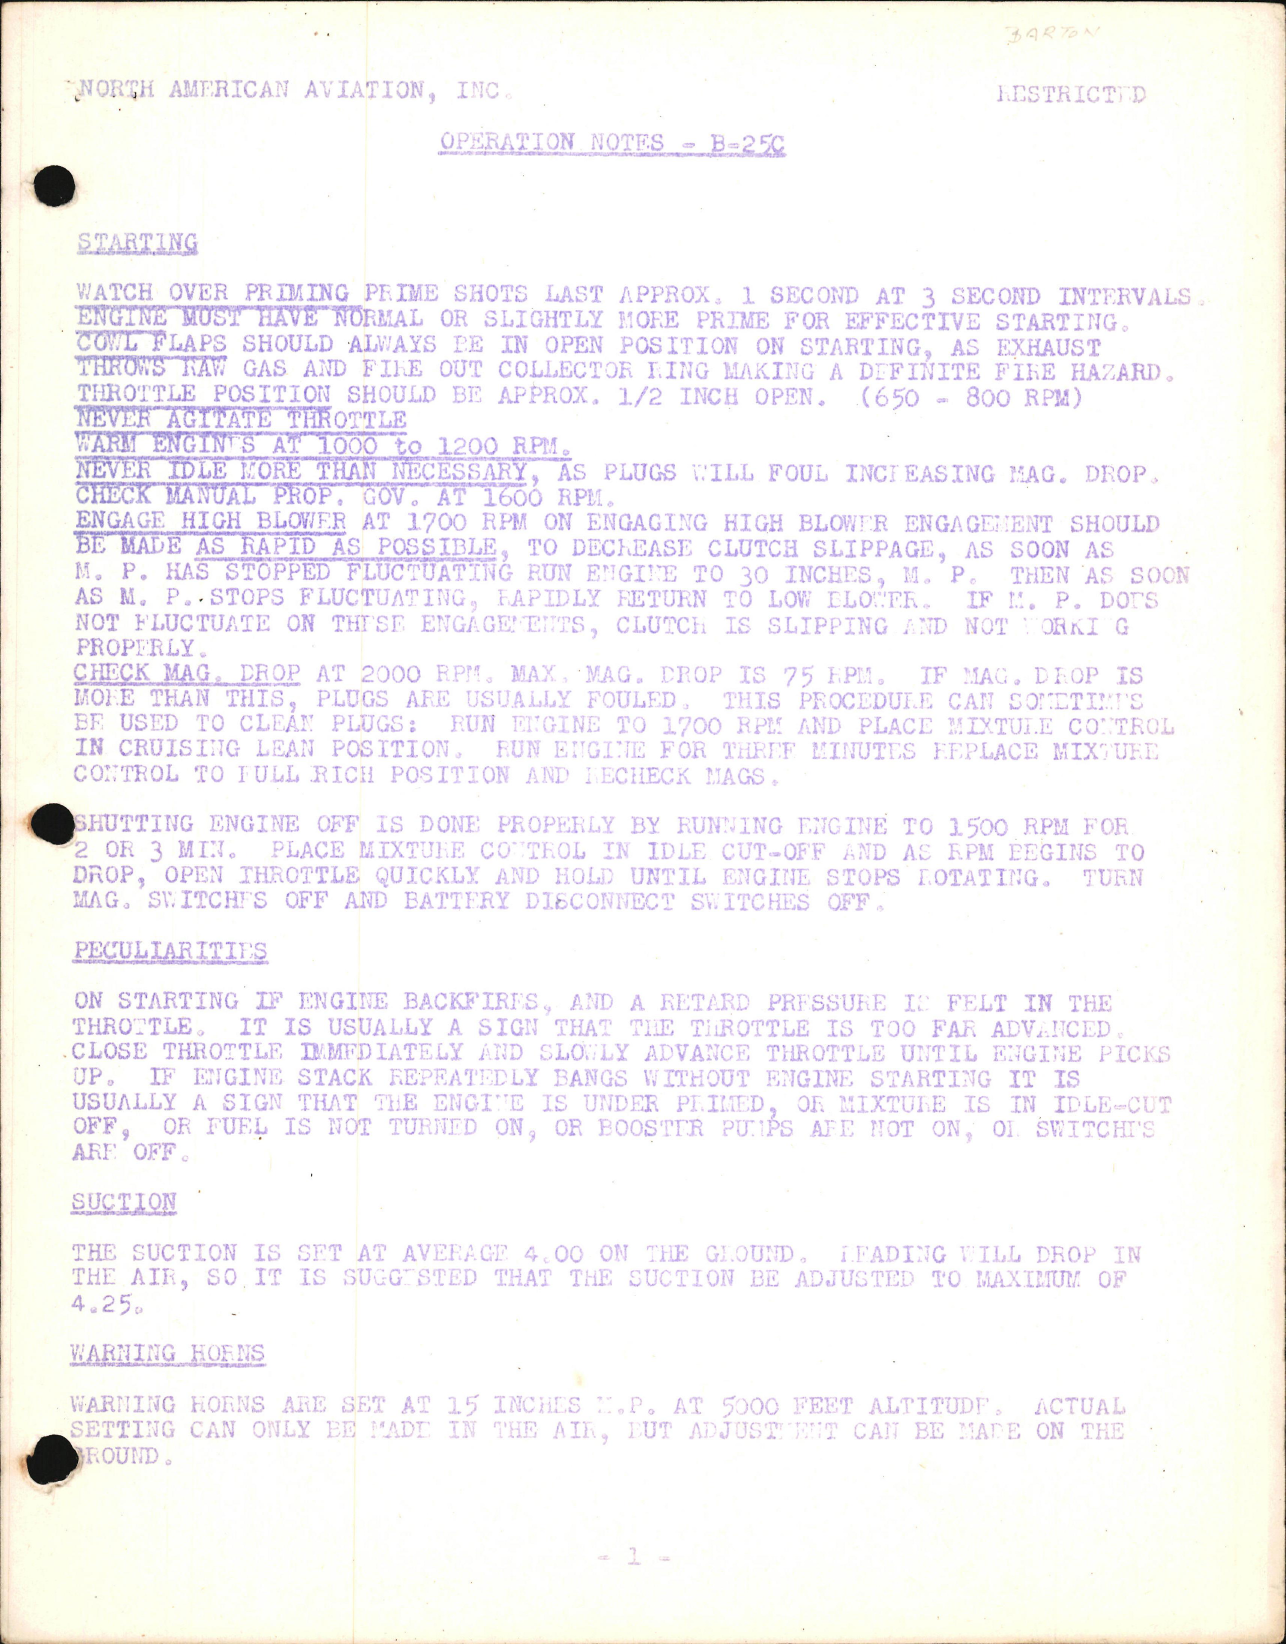 Sample page 1 from AirCorps Library document: General Operation Notes for B-25C